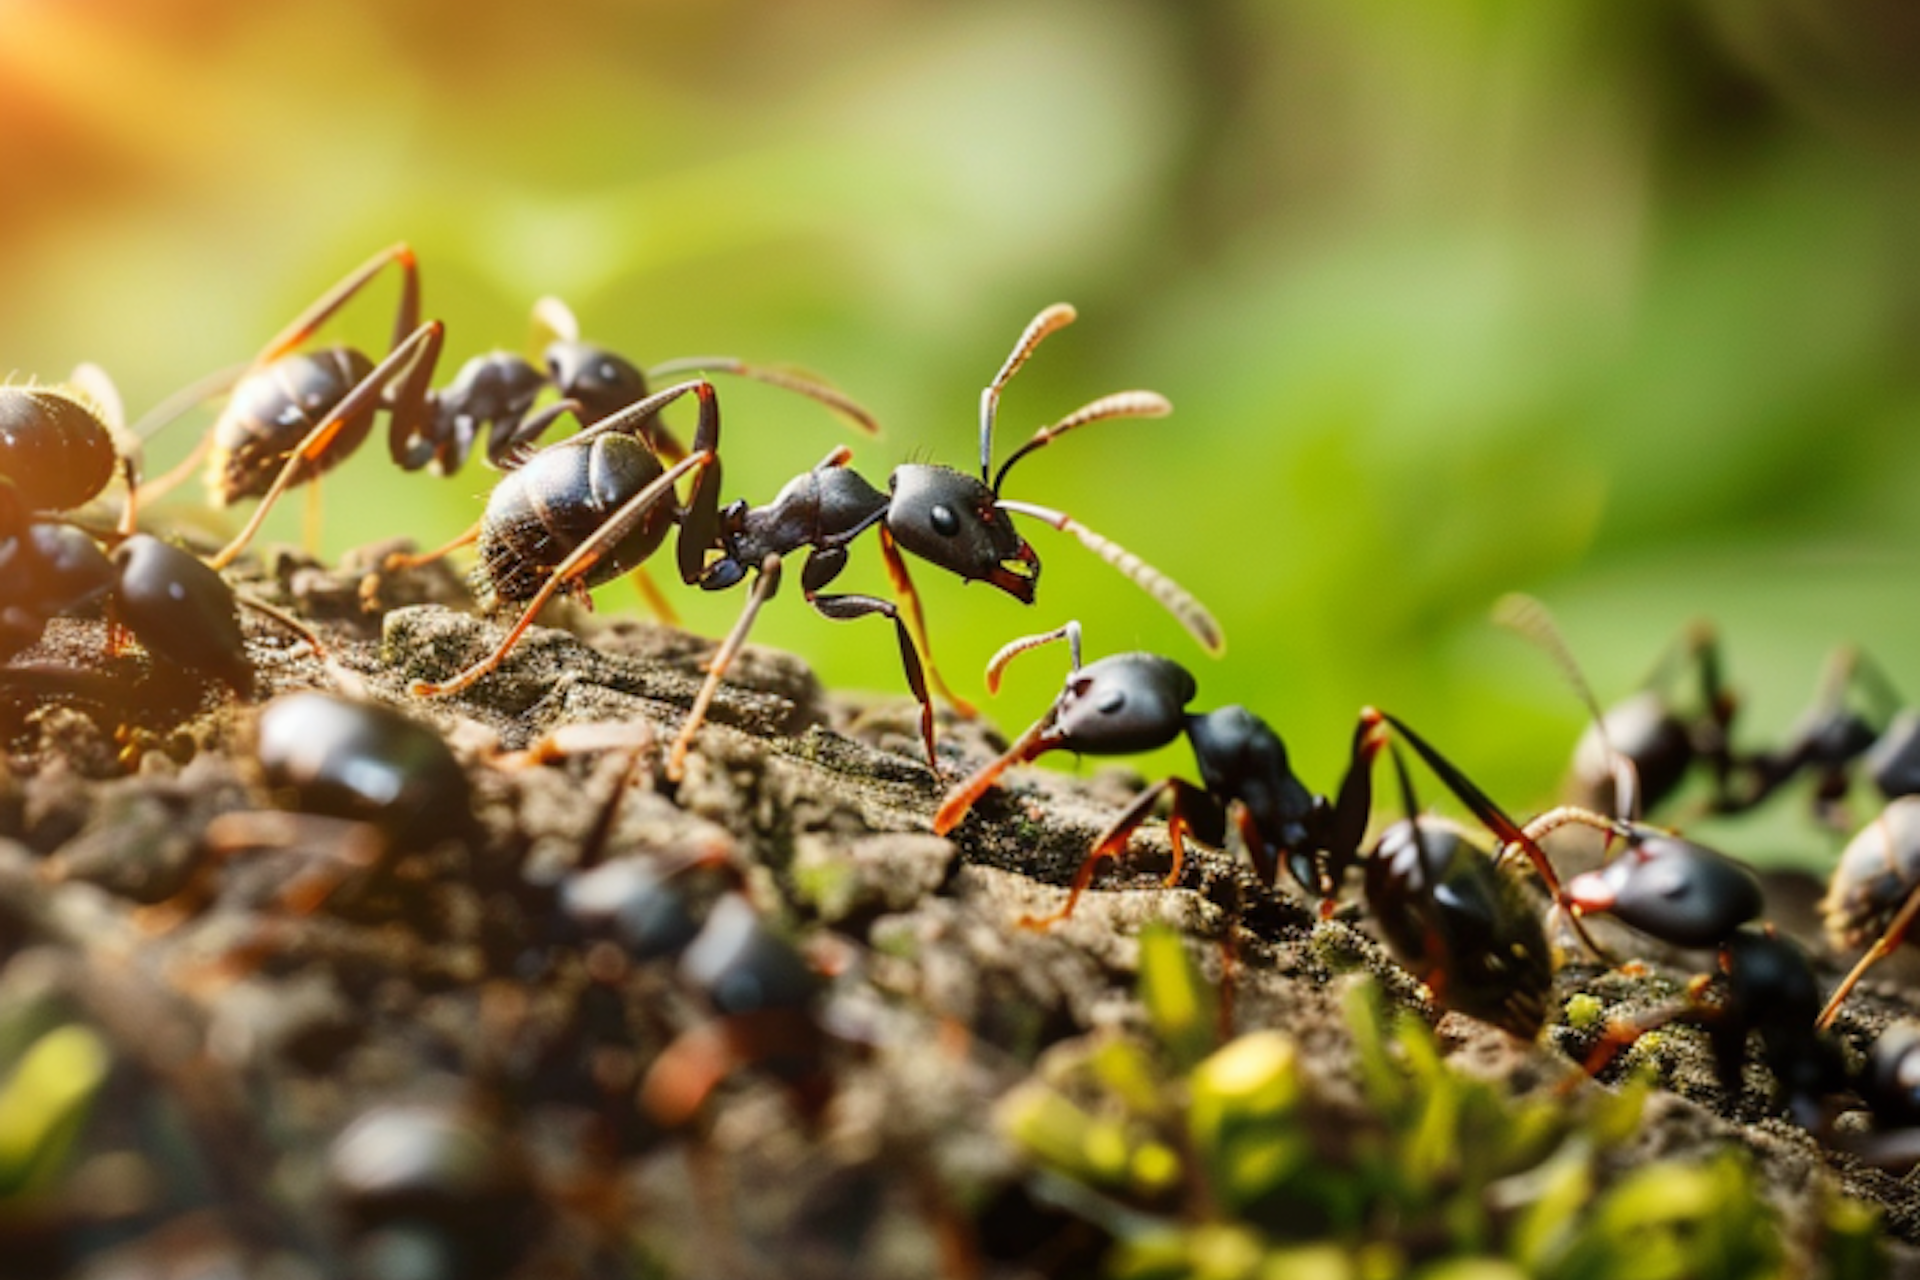 Ant infestations are a common occurrence for many Maryland homeowners